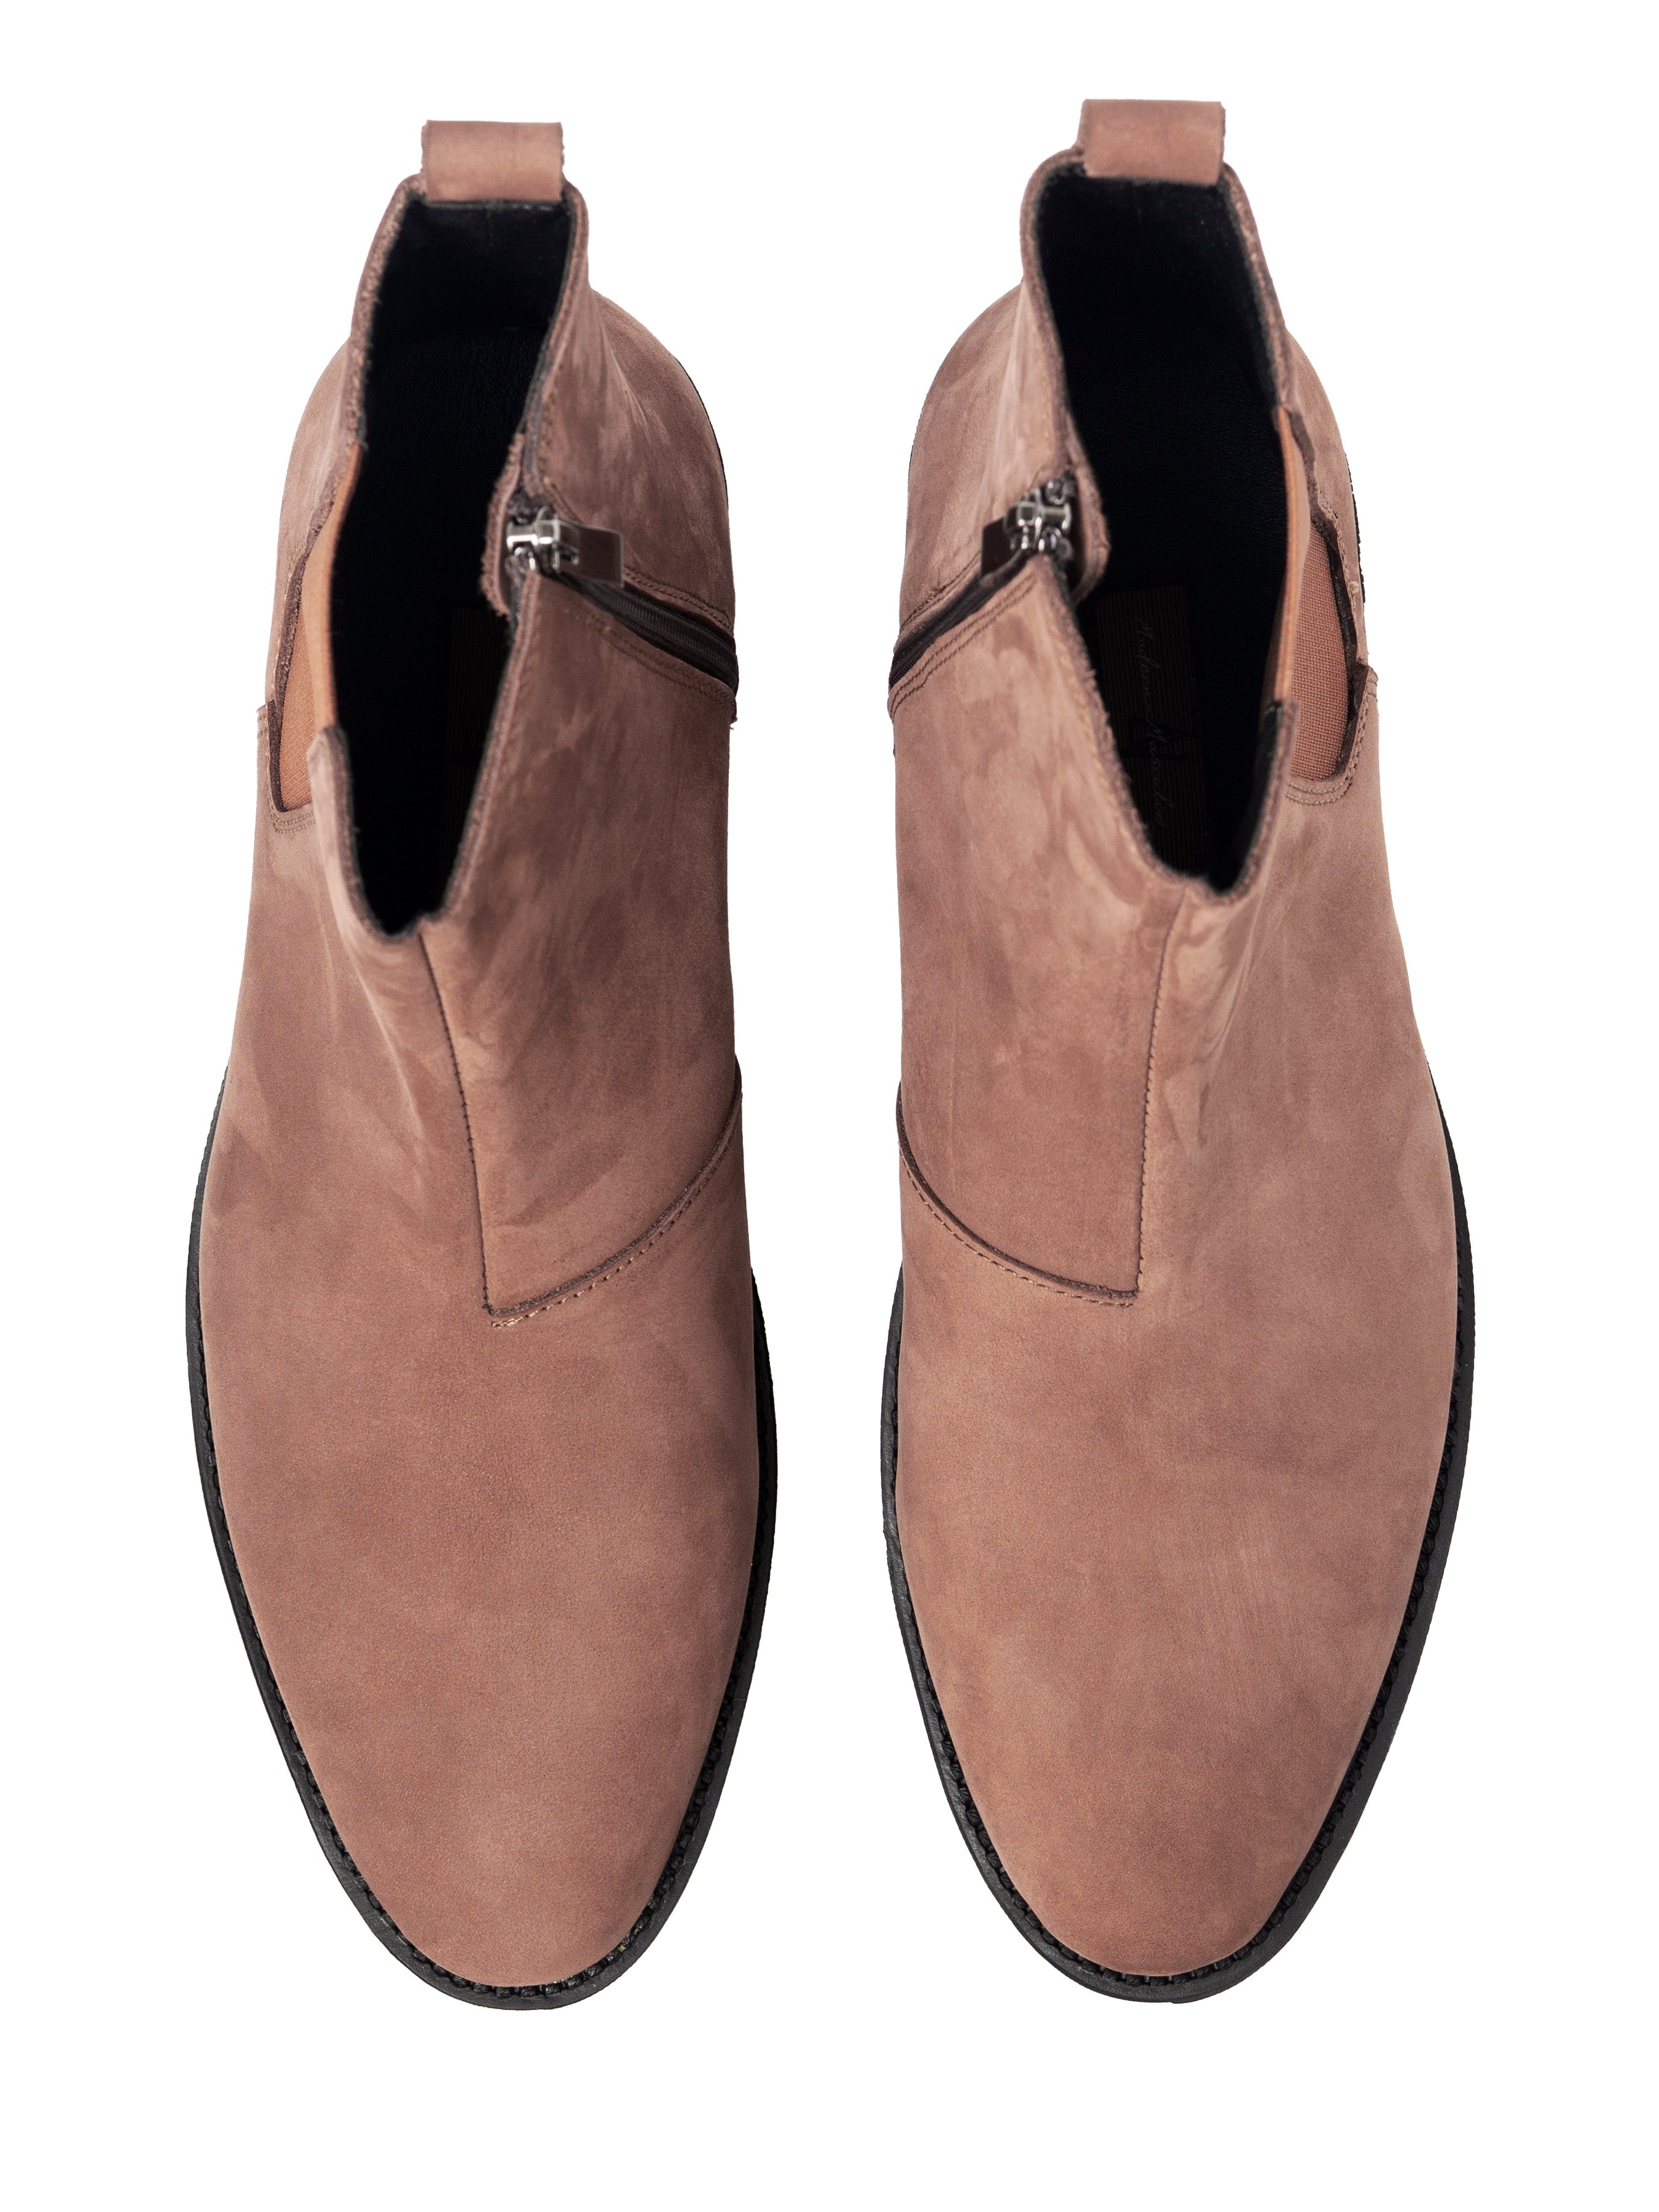 Chelsea Boots With Zipper - Cinnamon Brown Nubuck Leather (Crepe Sole)